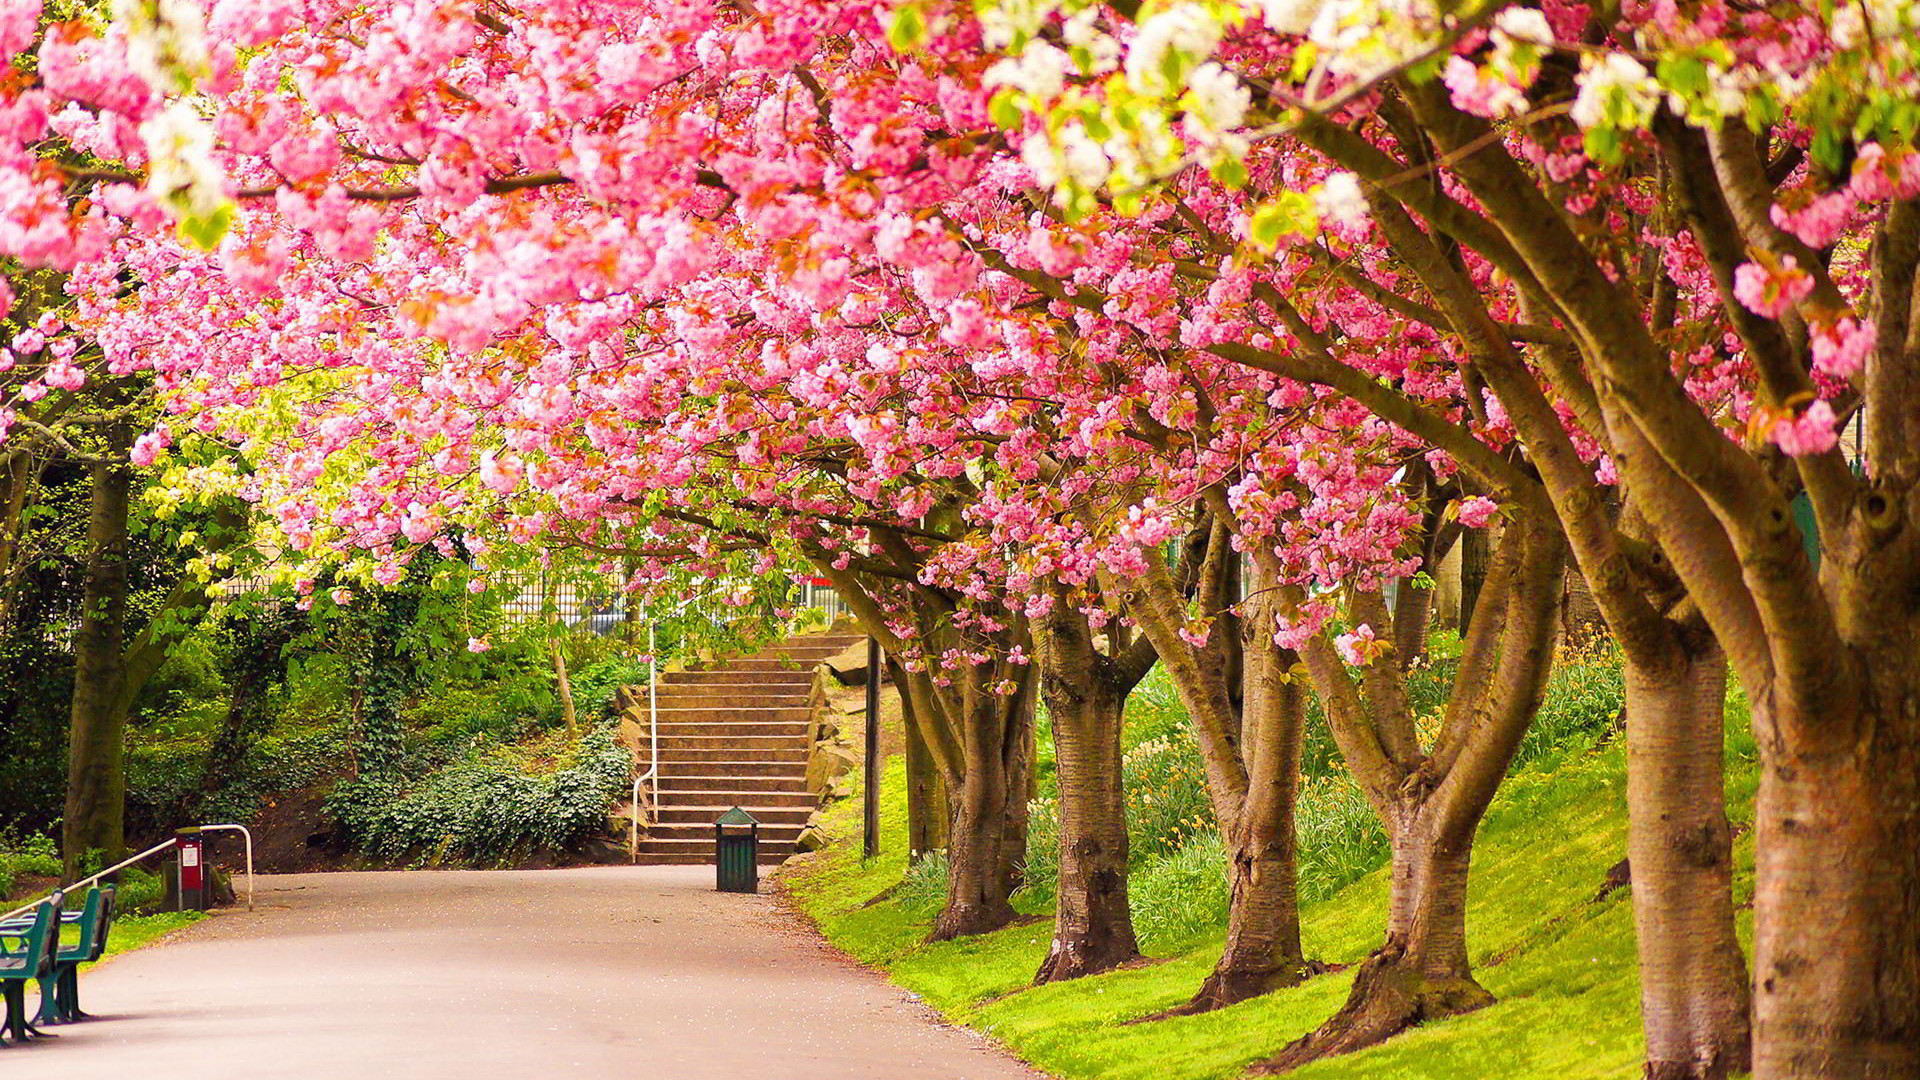 1920x1080 10 HD Nature Wallpapers with 1920Ã1080 Pixels 2 pink blossoms